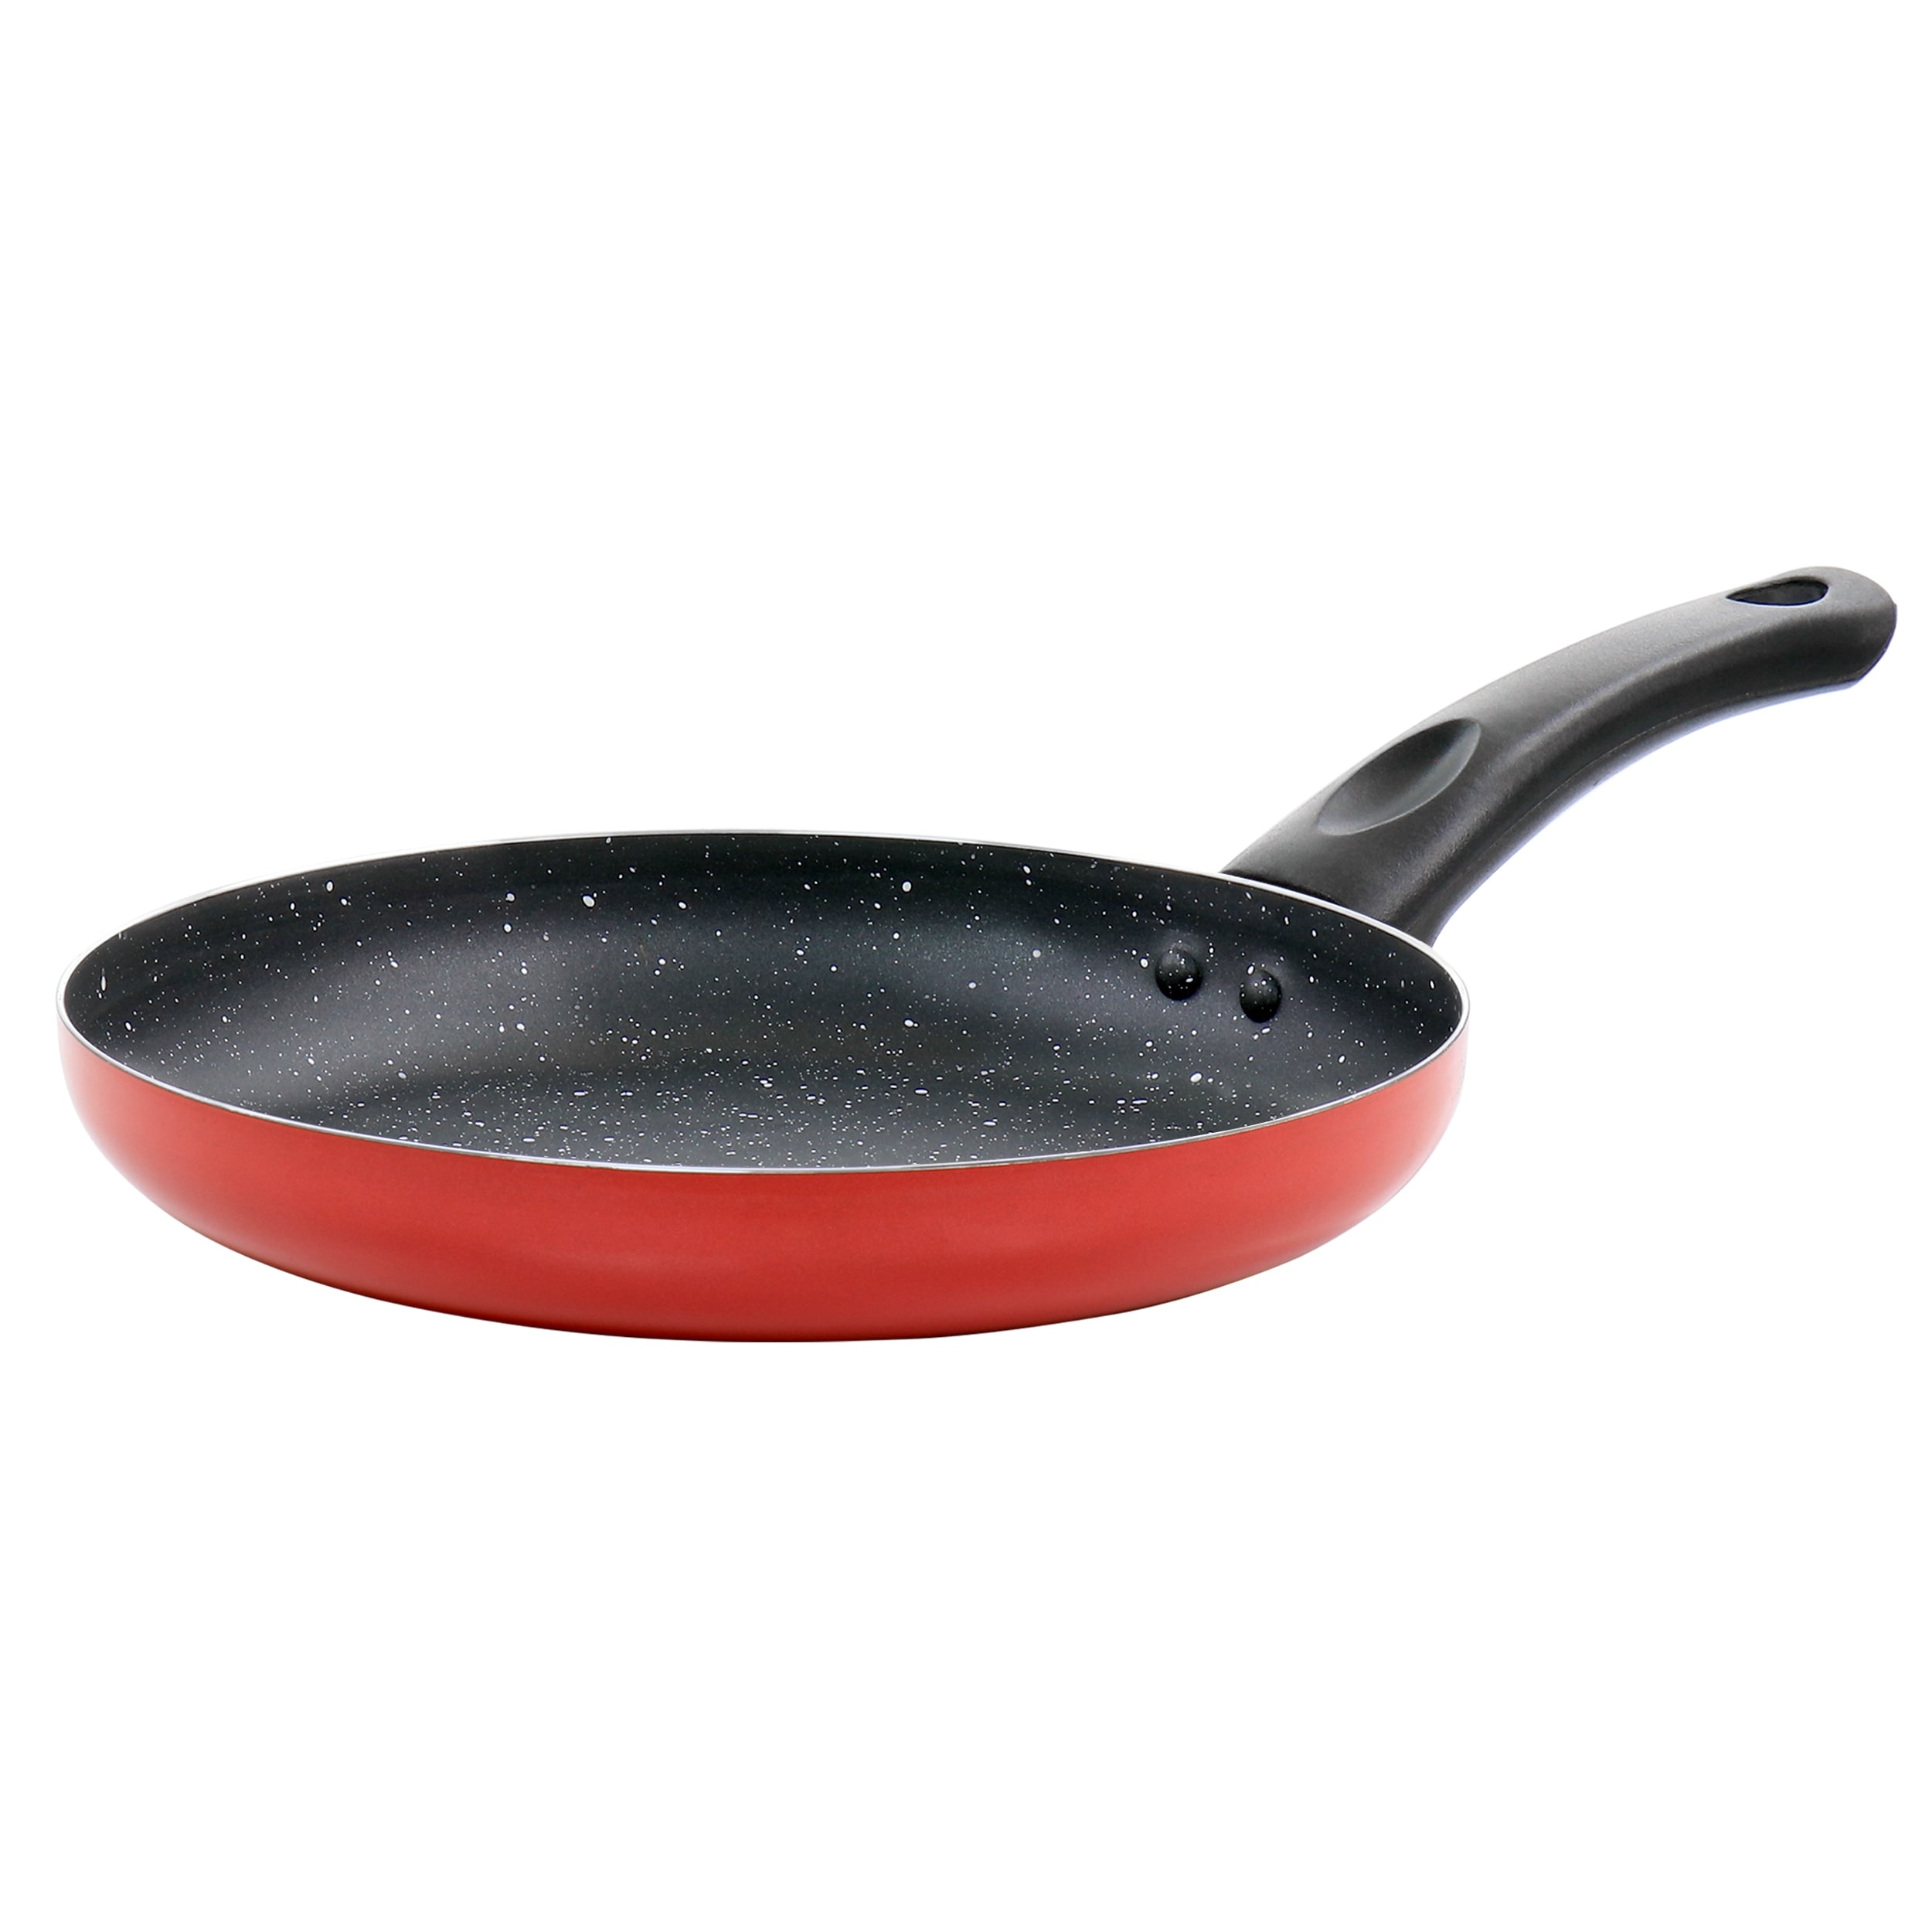 https://ak1.ostkcdn.com/images/products/is/images/direct/e926da69e9b2e91770974853f4f436ec505f43ce/9.5-Inch-Aluminum-Nonstick-Frying-Pan-in-Red.jpg